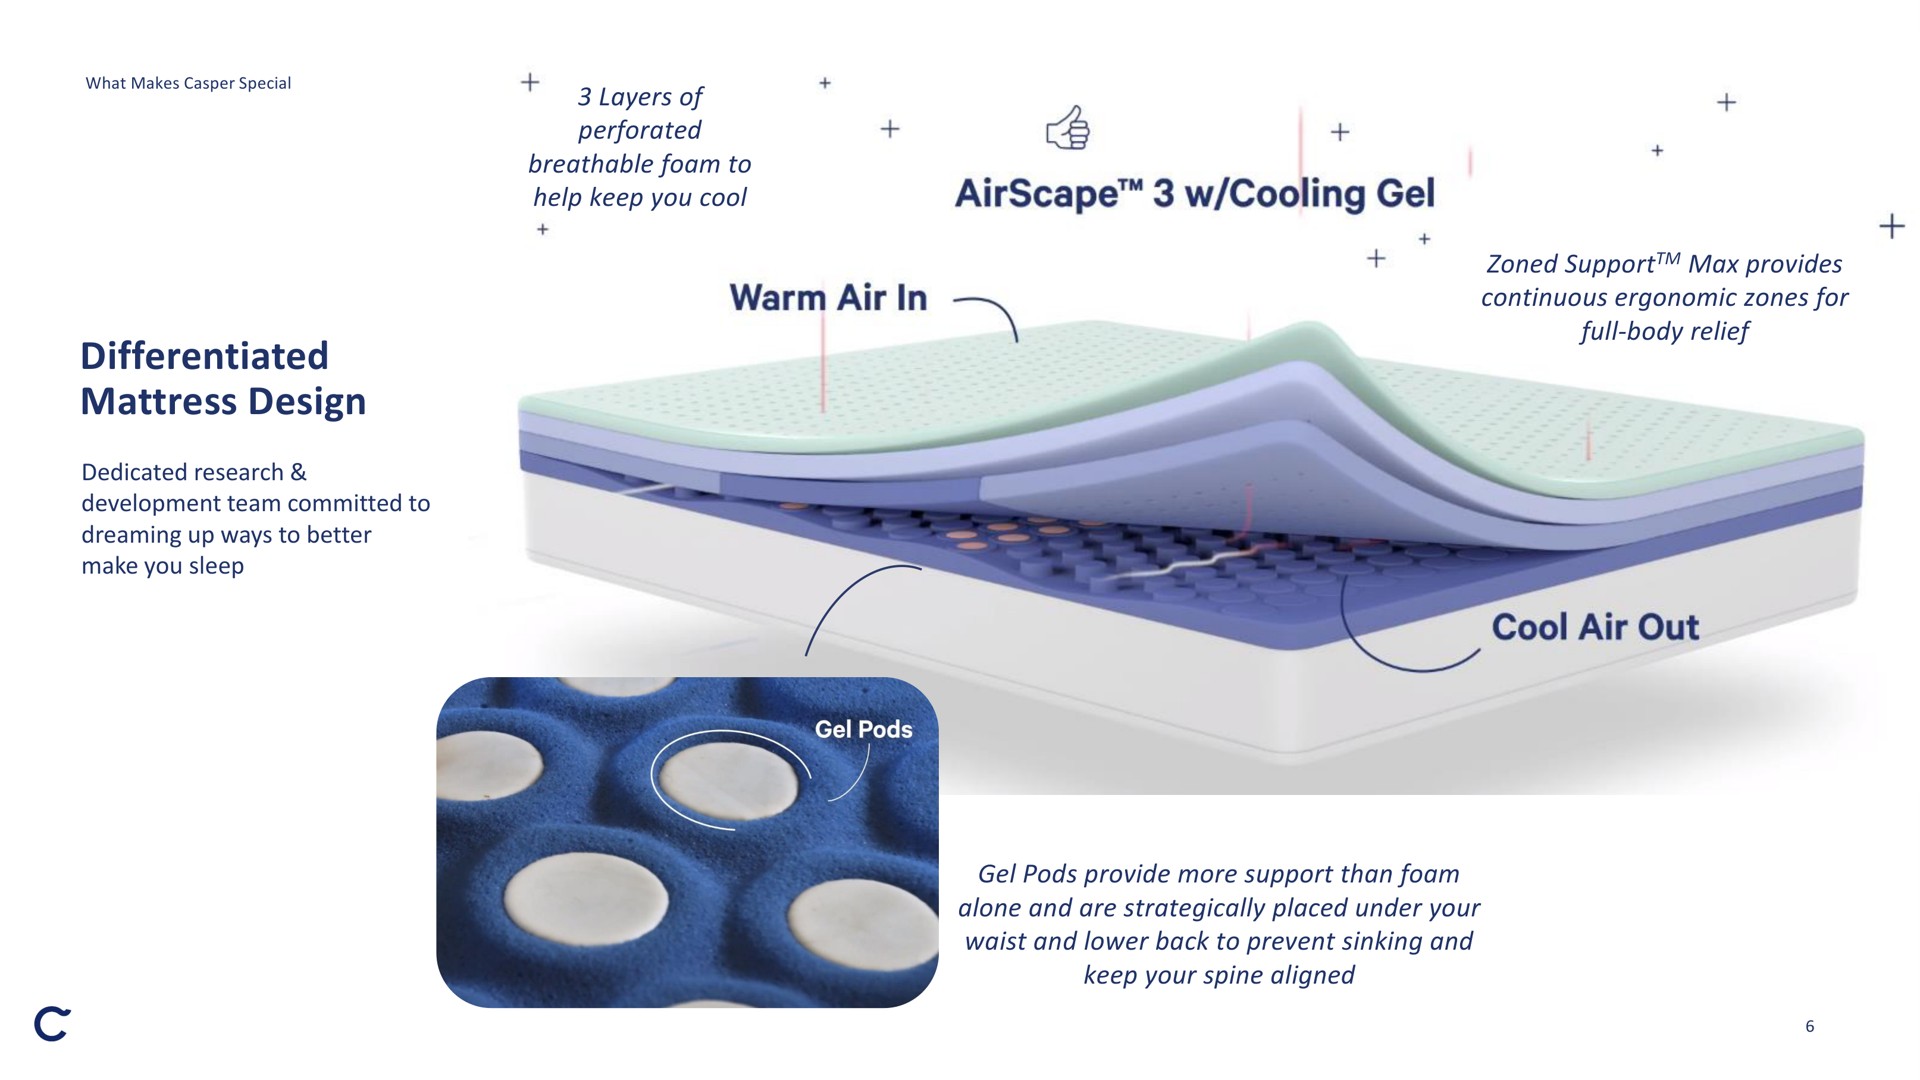 differentiated mattress design help keep you cool airscape cooling gel cool air out | Casper